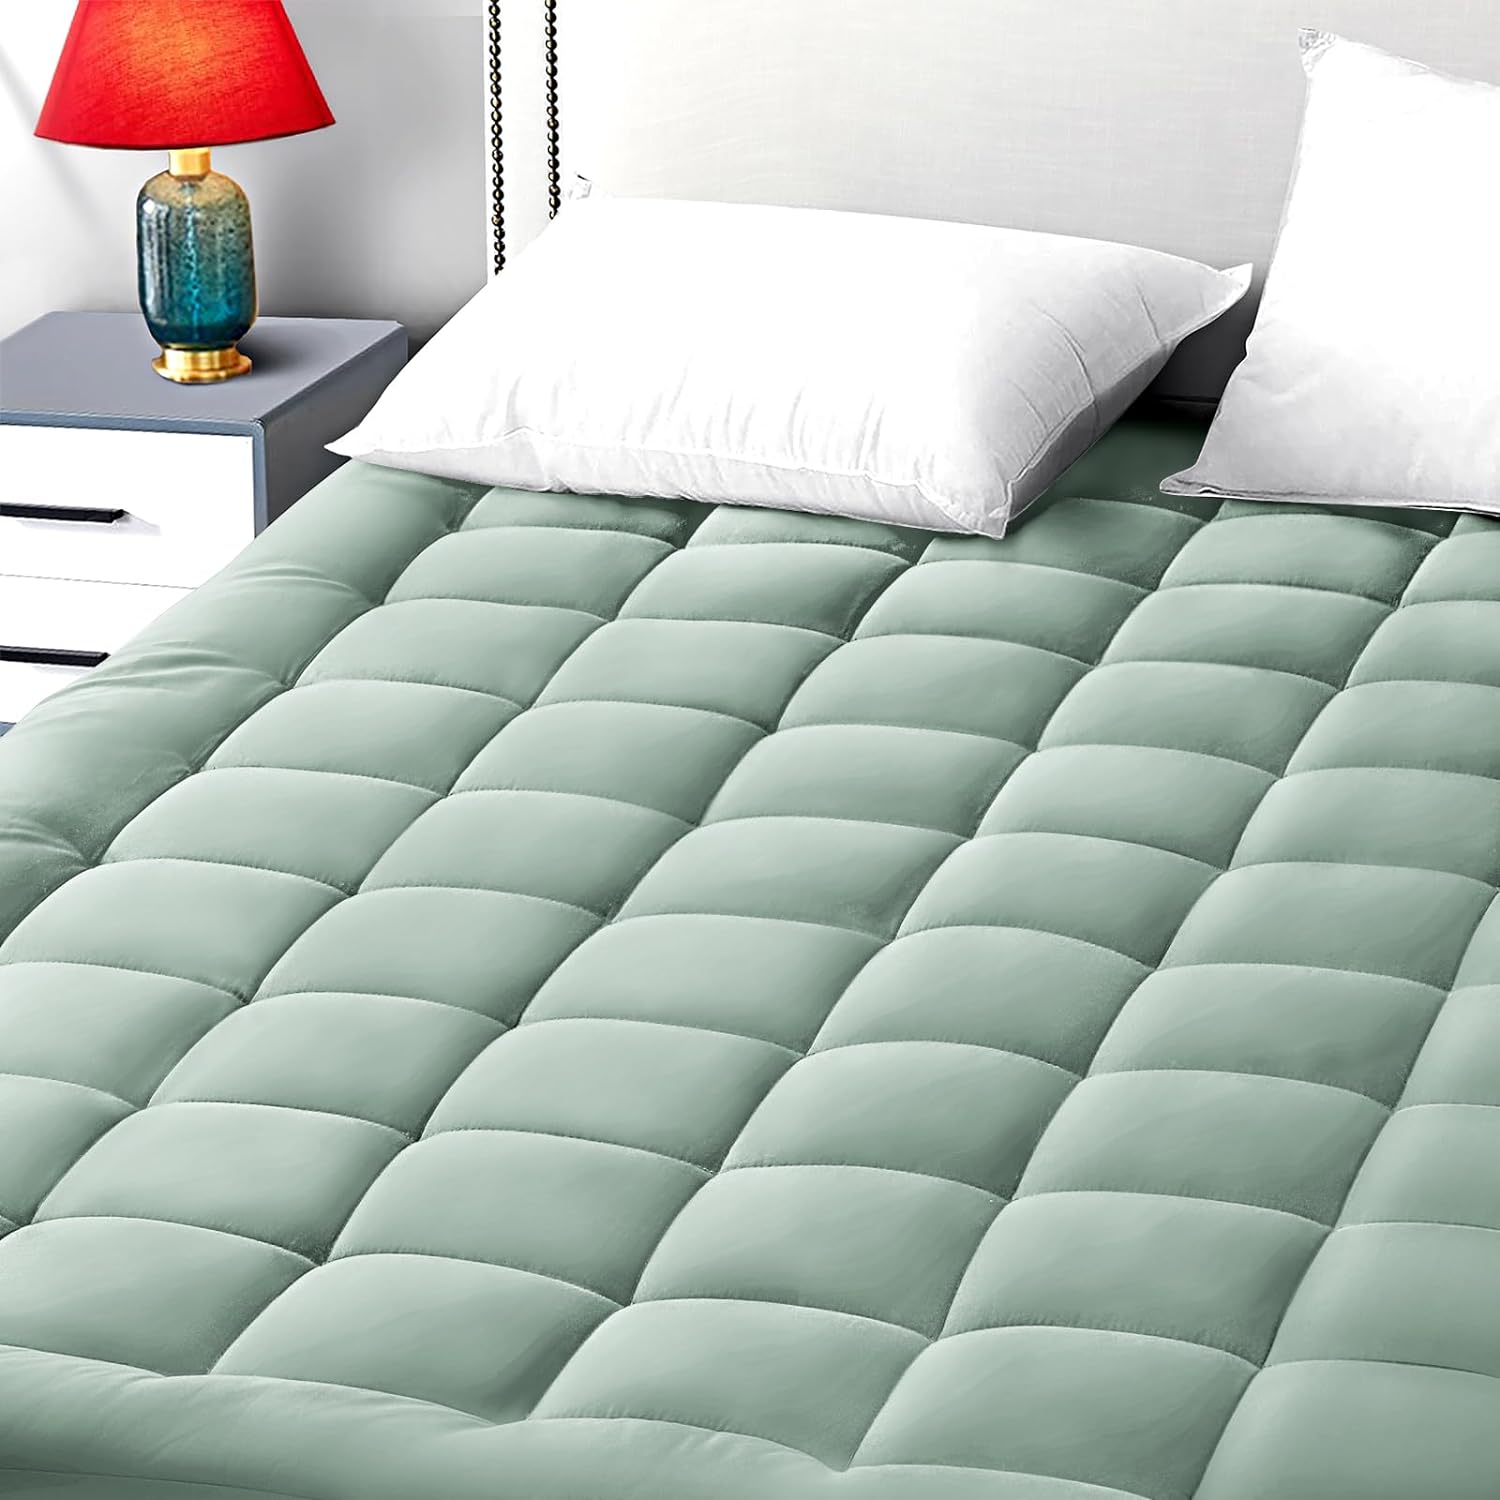 What are the categories of MATTRESS PAD